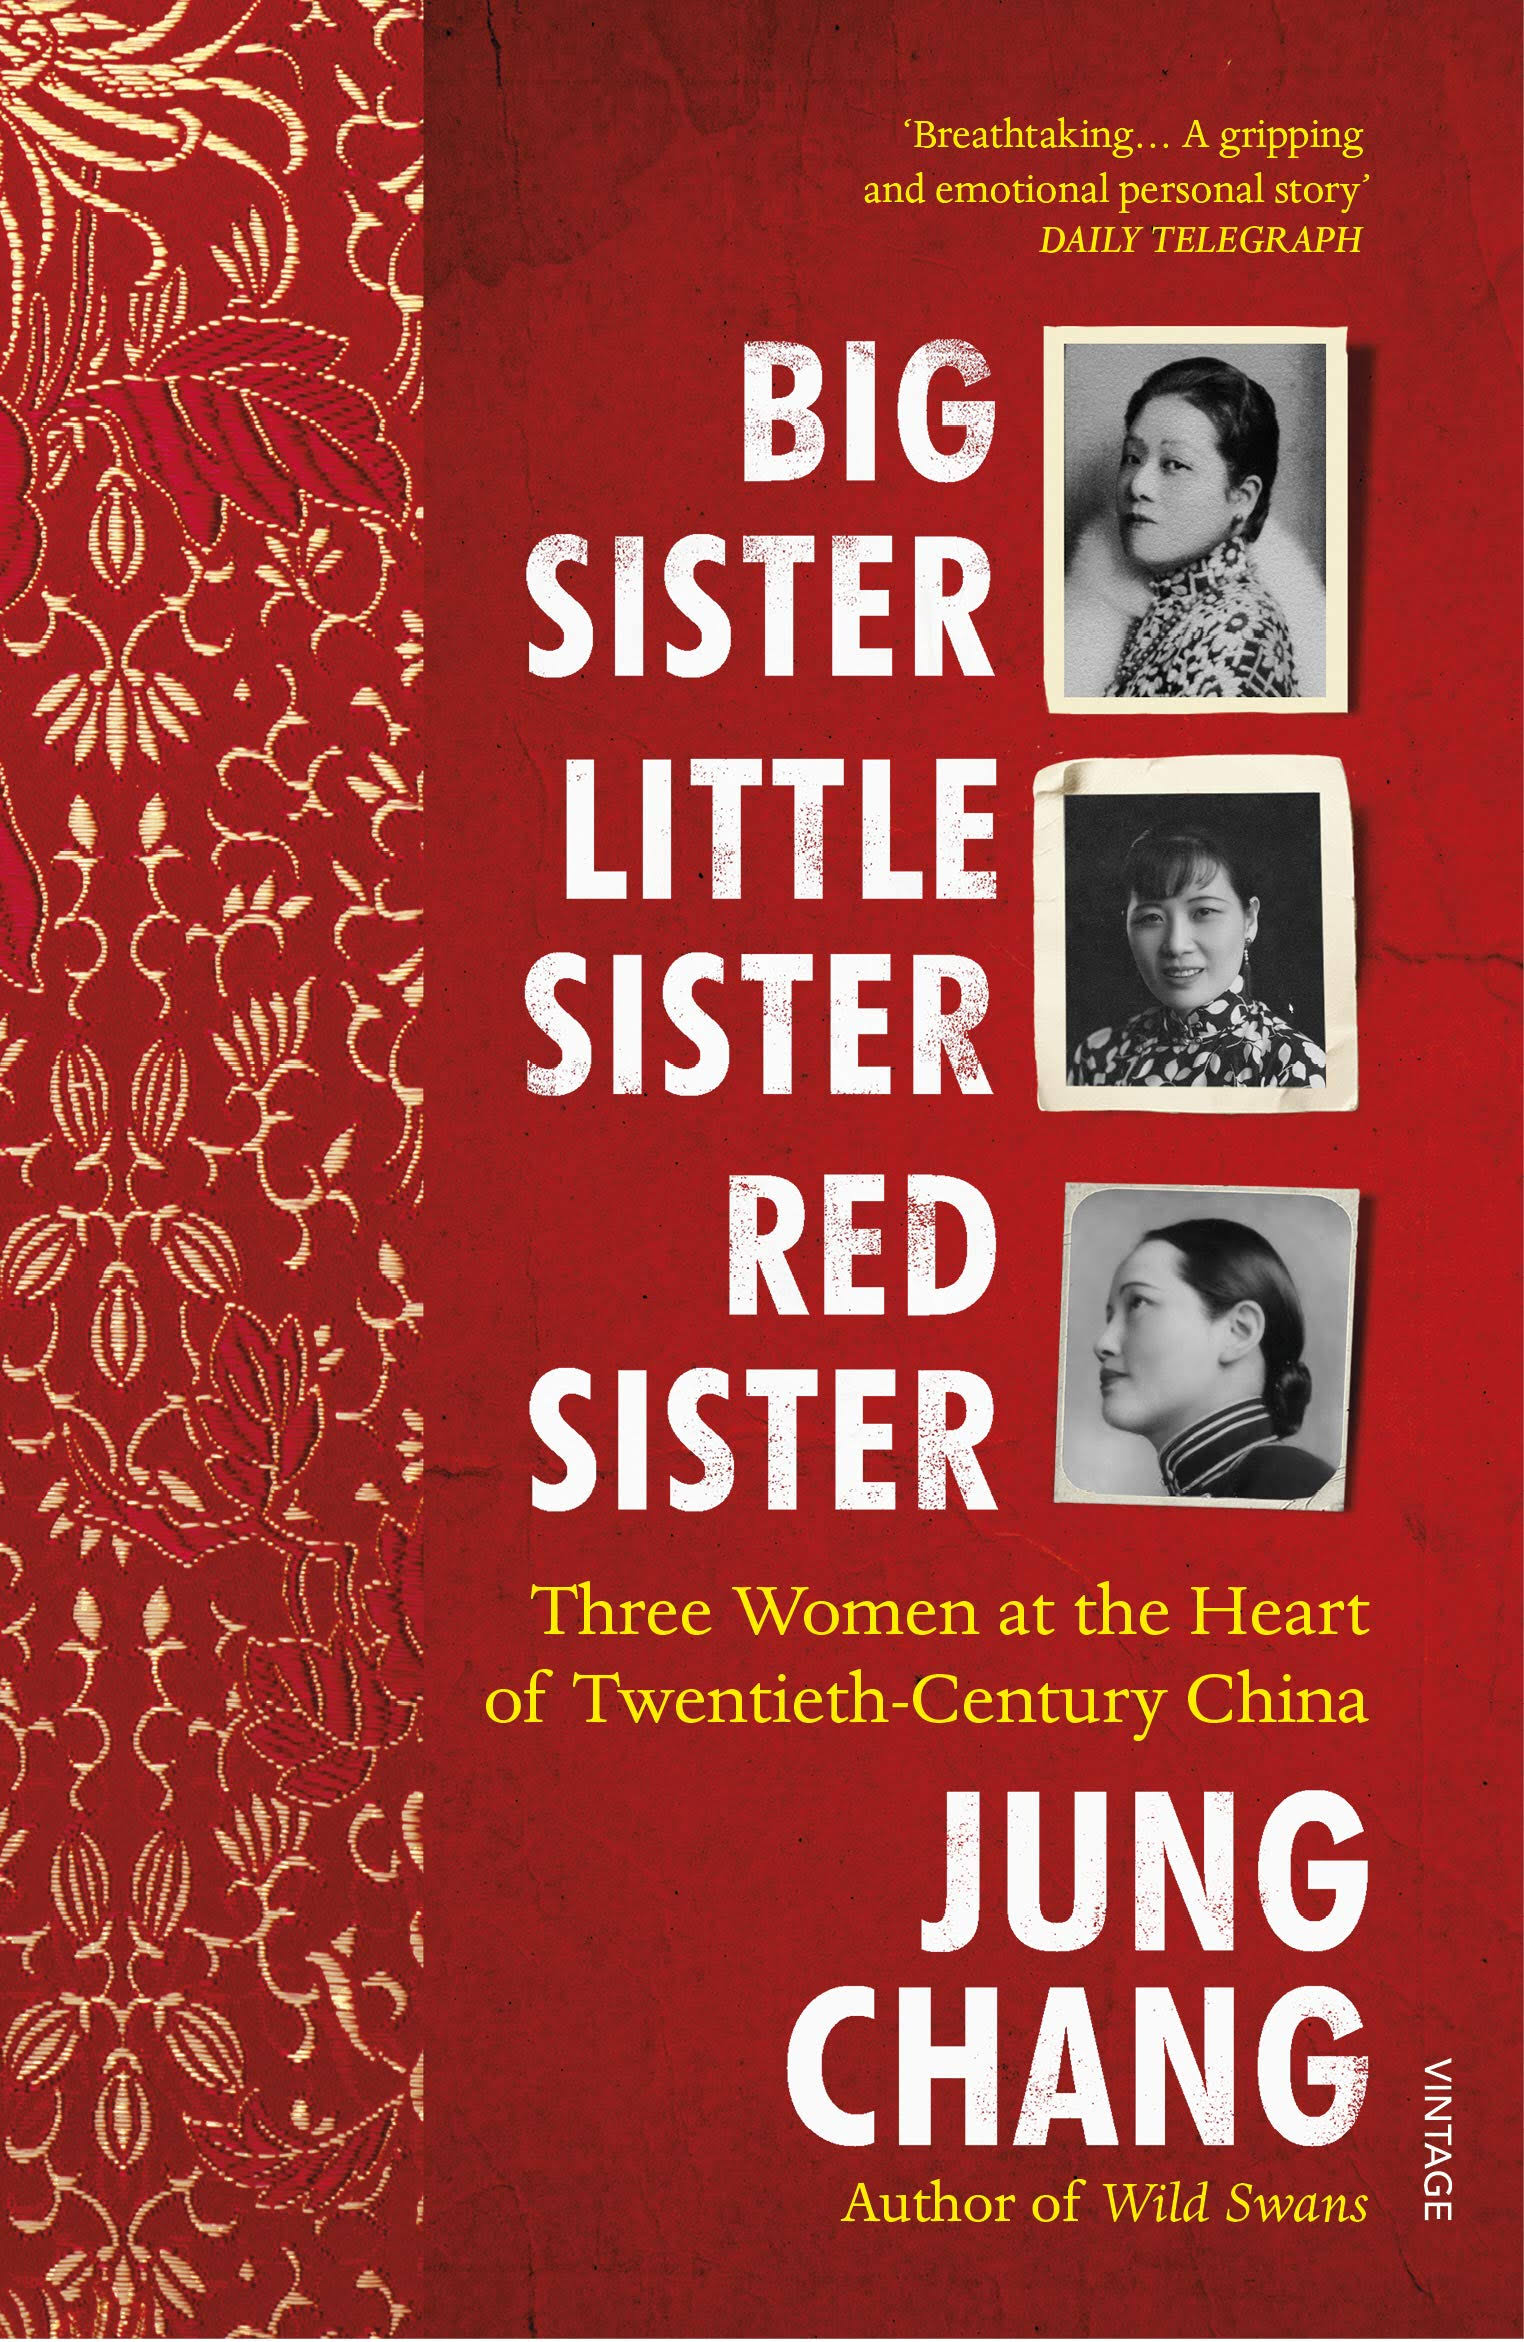 Big Sister, Little Sister, Red Sister: Three Women at the Heart of Twentieth-Century China [Book]